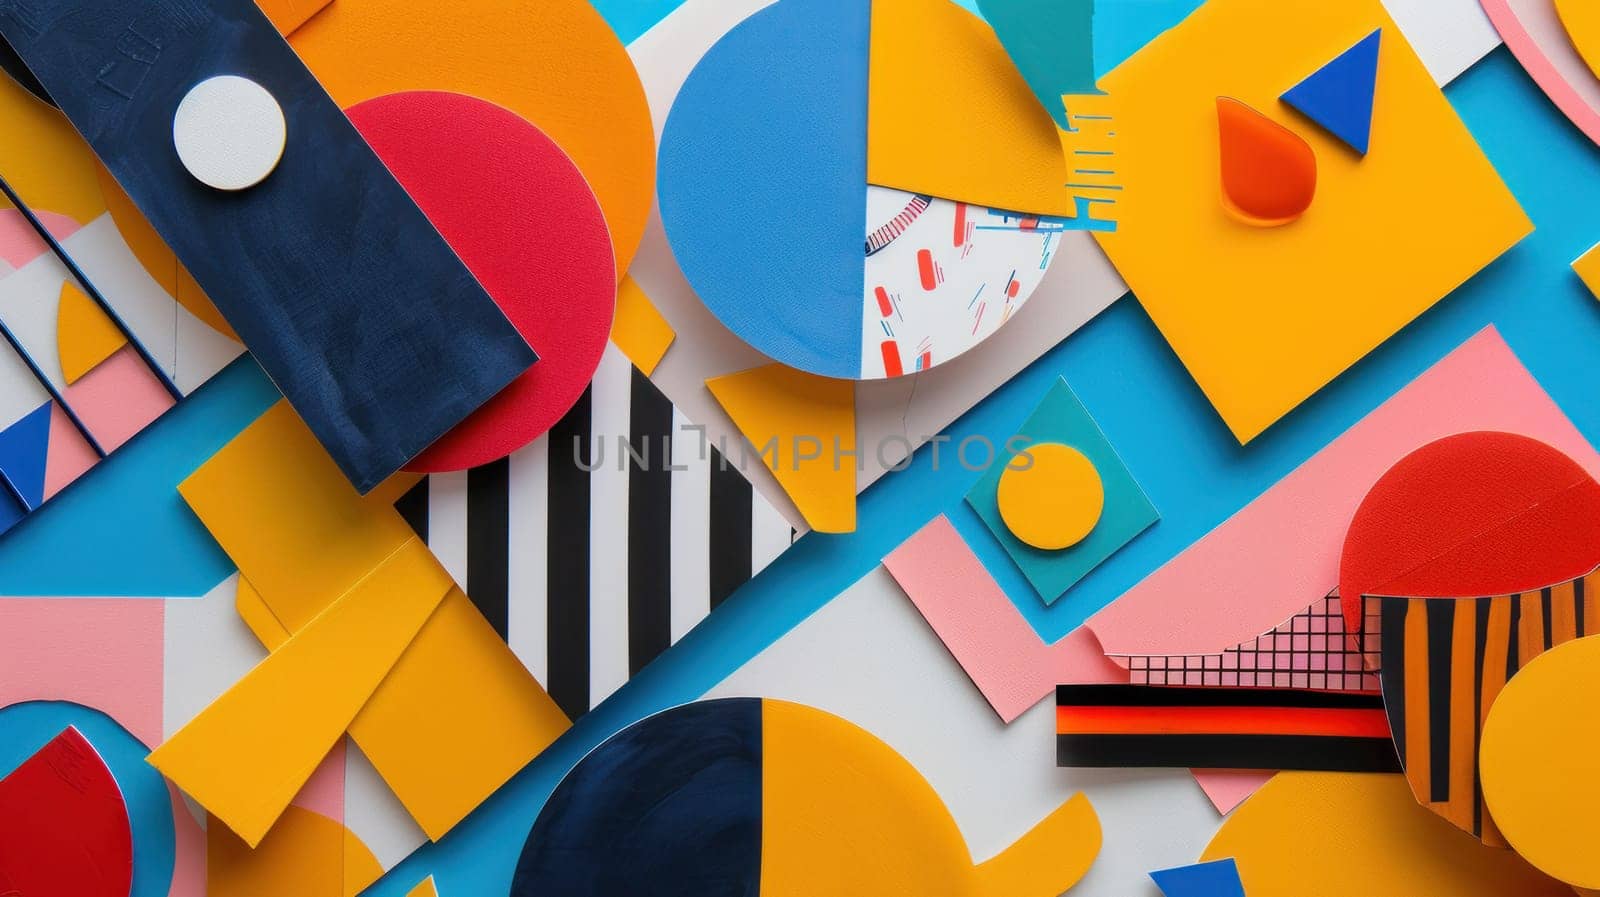 A colorful collage of shapes and circles. The image is abstract and has a playful, whimsical feel to it. The use of bright colors and various shapes creates a sense of movement and energy